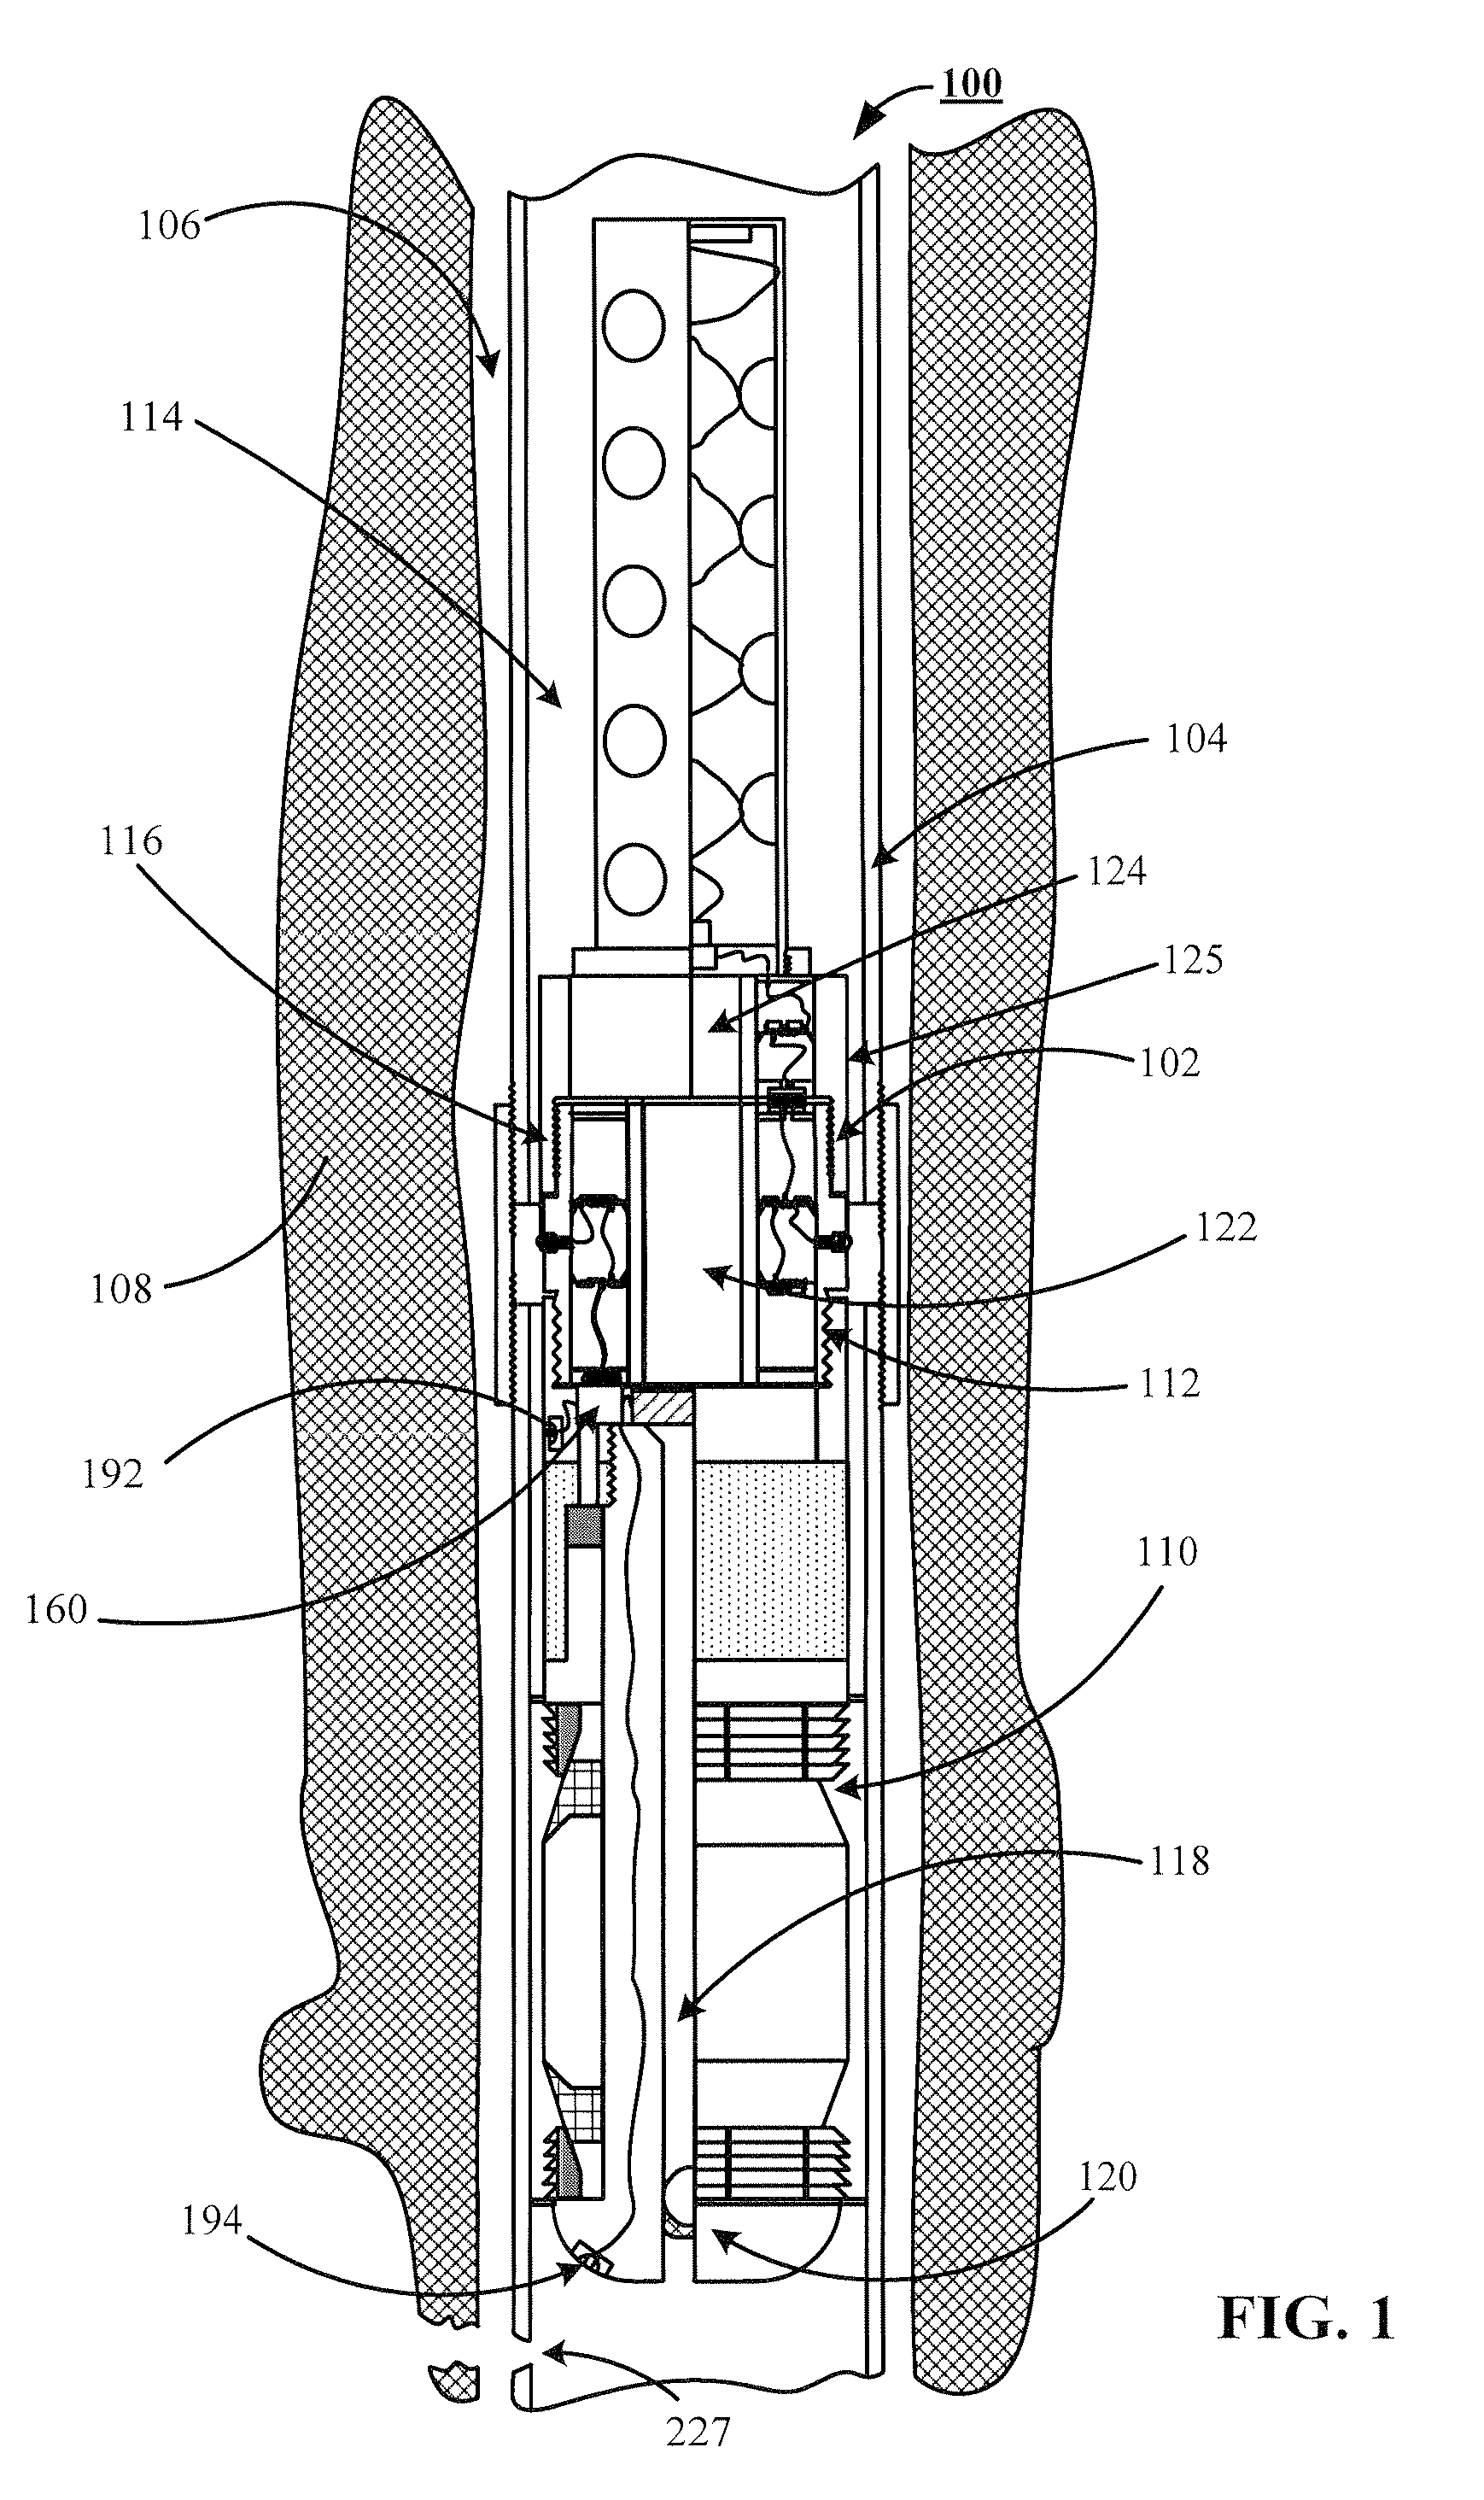 Downhole tool delivery system